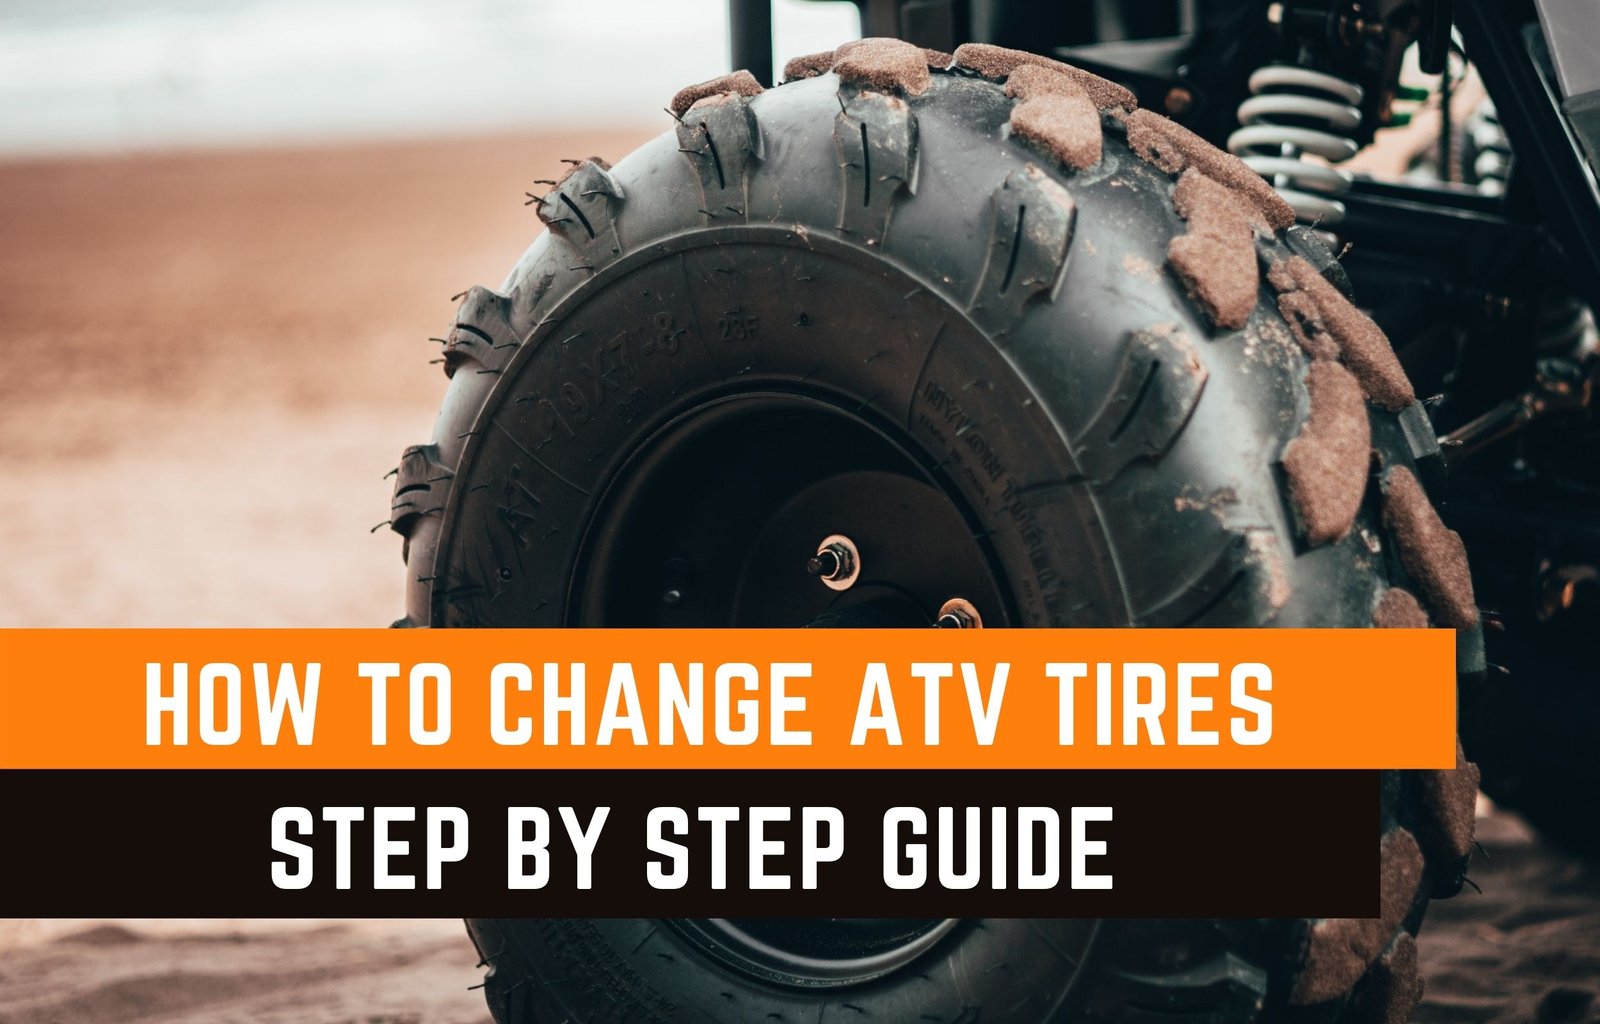 How To Change ATV Tire Like a Pro: Step-by-Step Guide